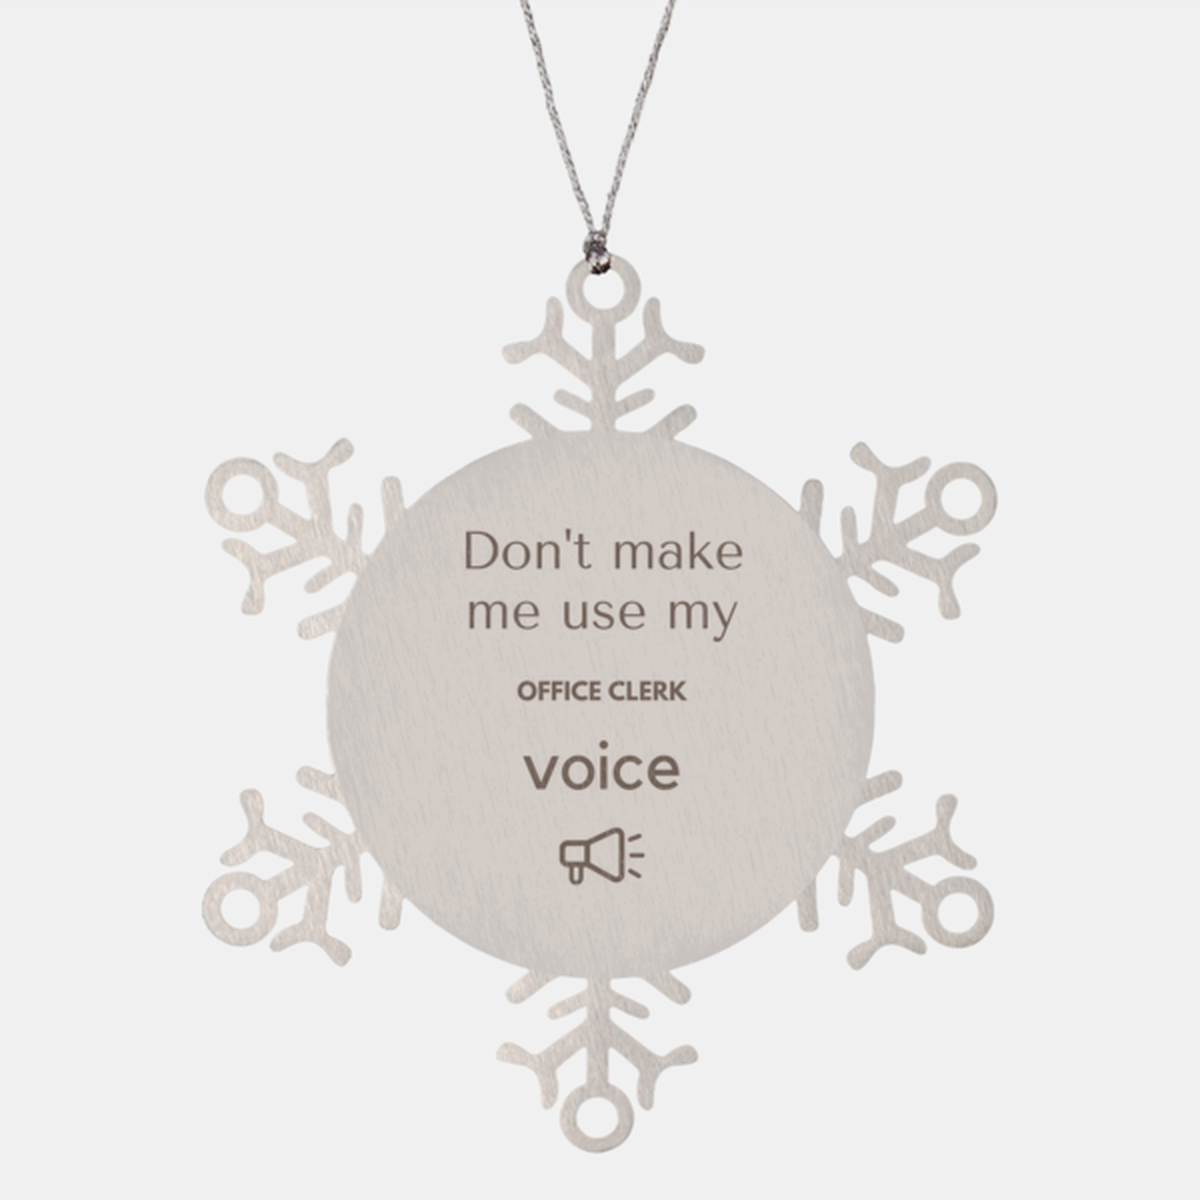 Don't make me use my Office Clerk voice, Sarcasm Office Clerk Ornament Gifts, Christmas Office Clerk Snowflake Ornament Unique Gifts For Office Clerk Coworkers, Men, Women, Colleague, Friends